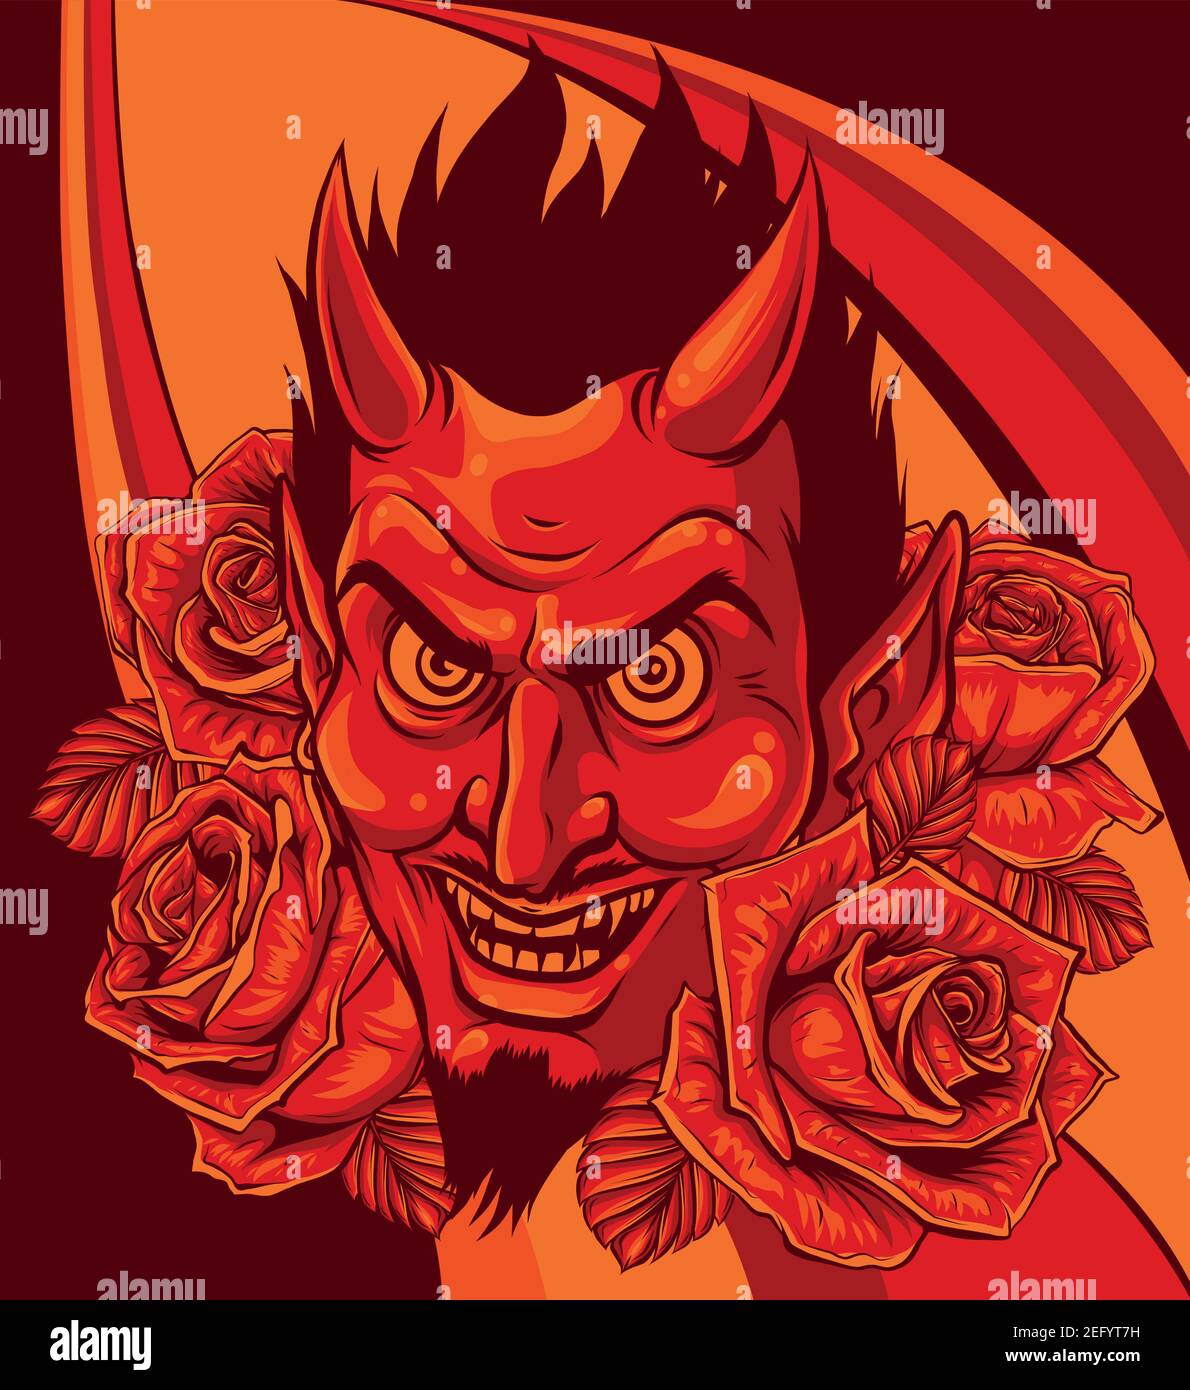 Evil face with red roses. Illustration vector image Stock Vector